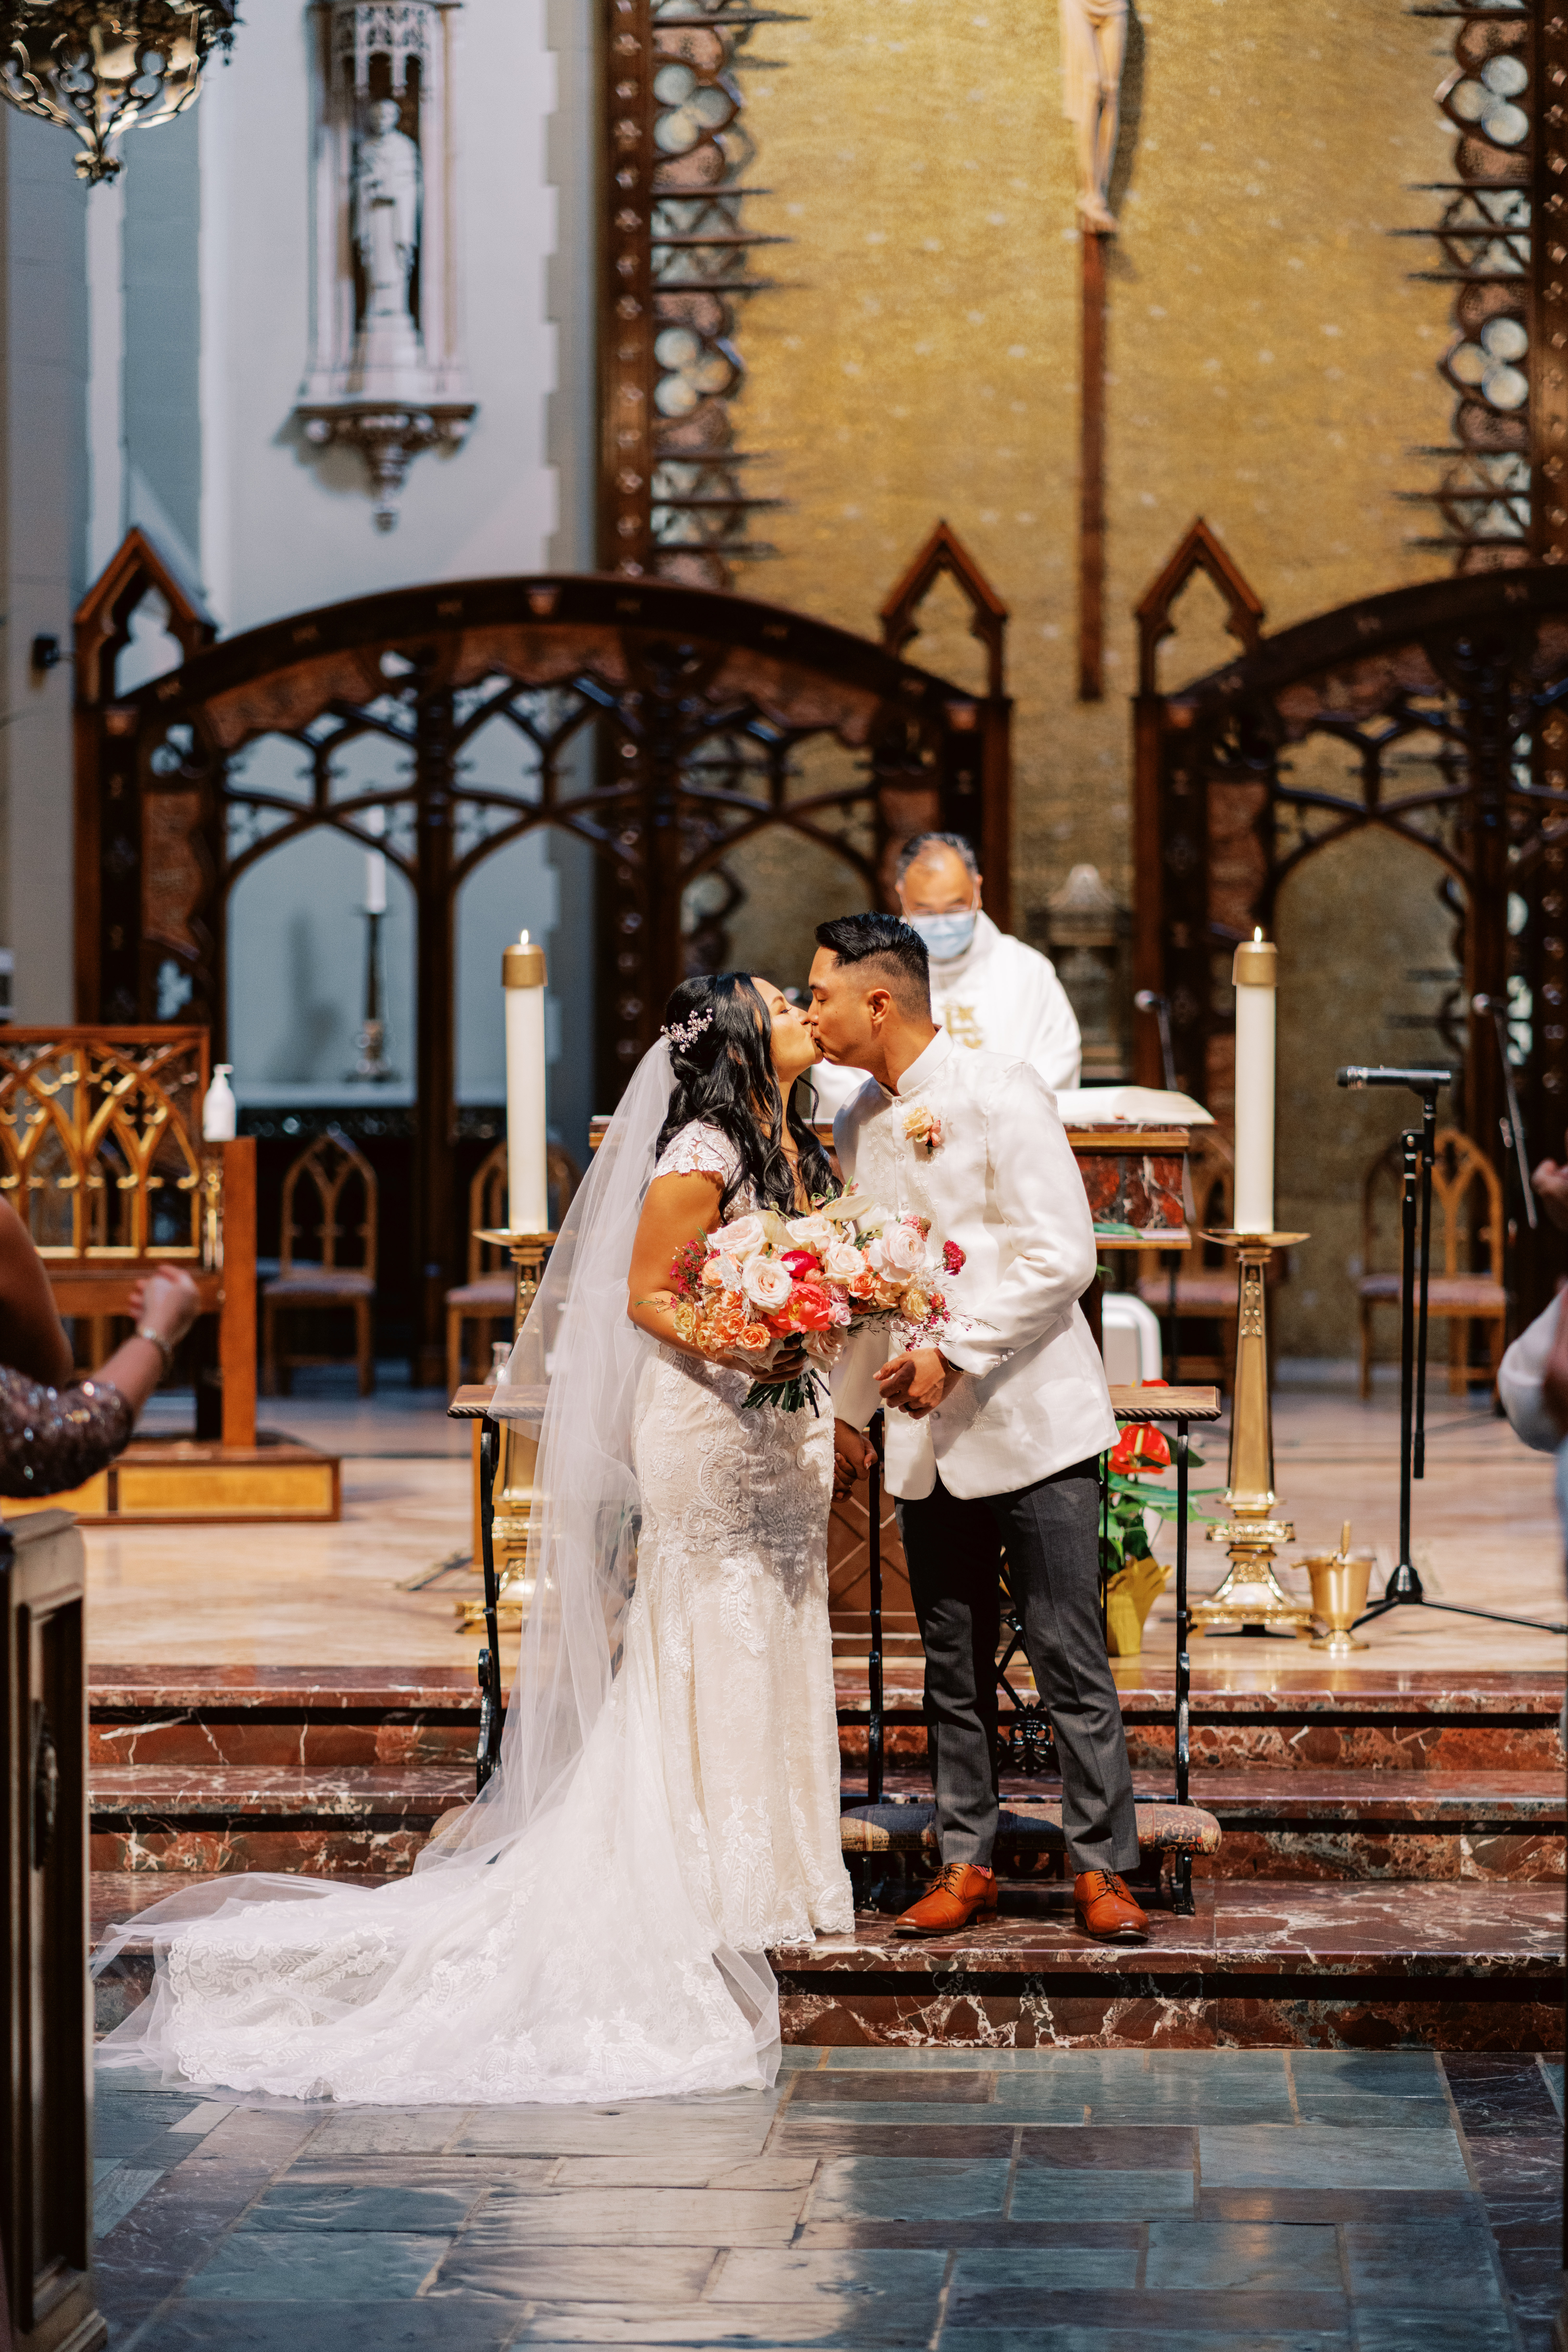 bride and groom first kiss during church wedding ceremony